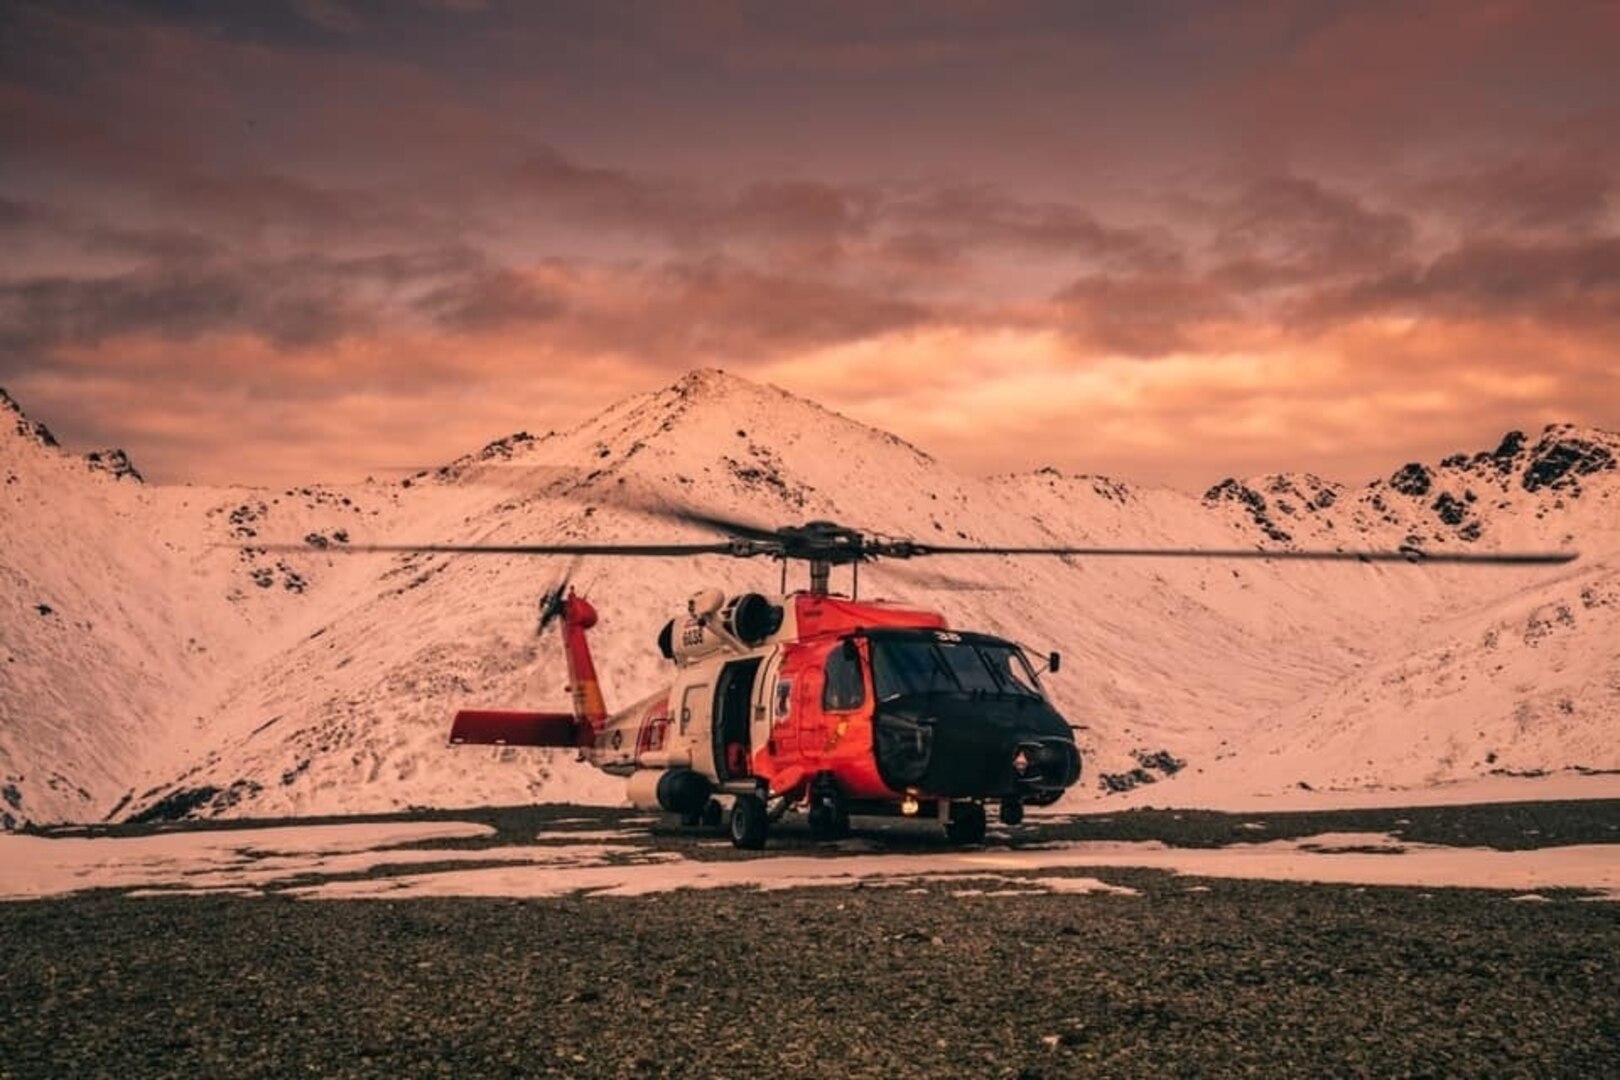 Coast Guard helicopter in front of a mountain at sunset